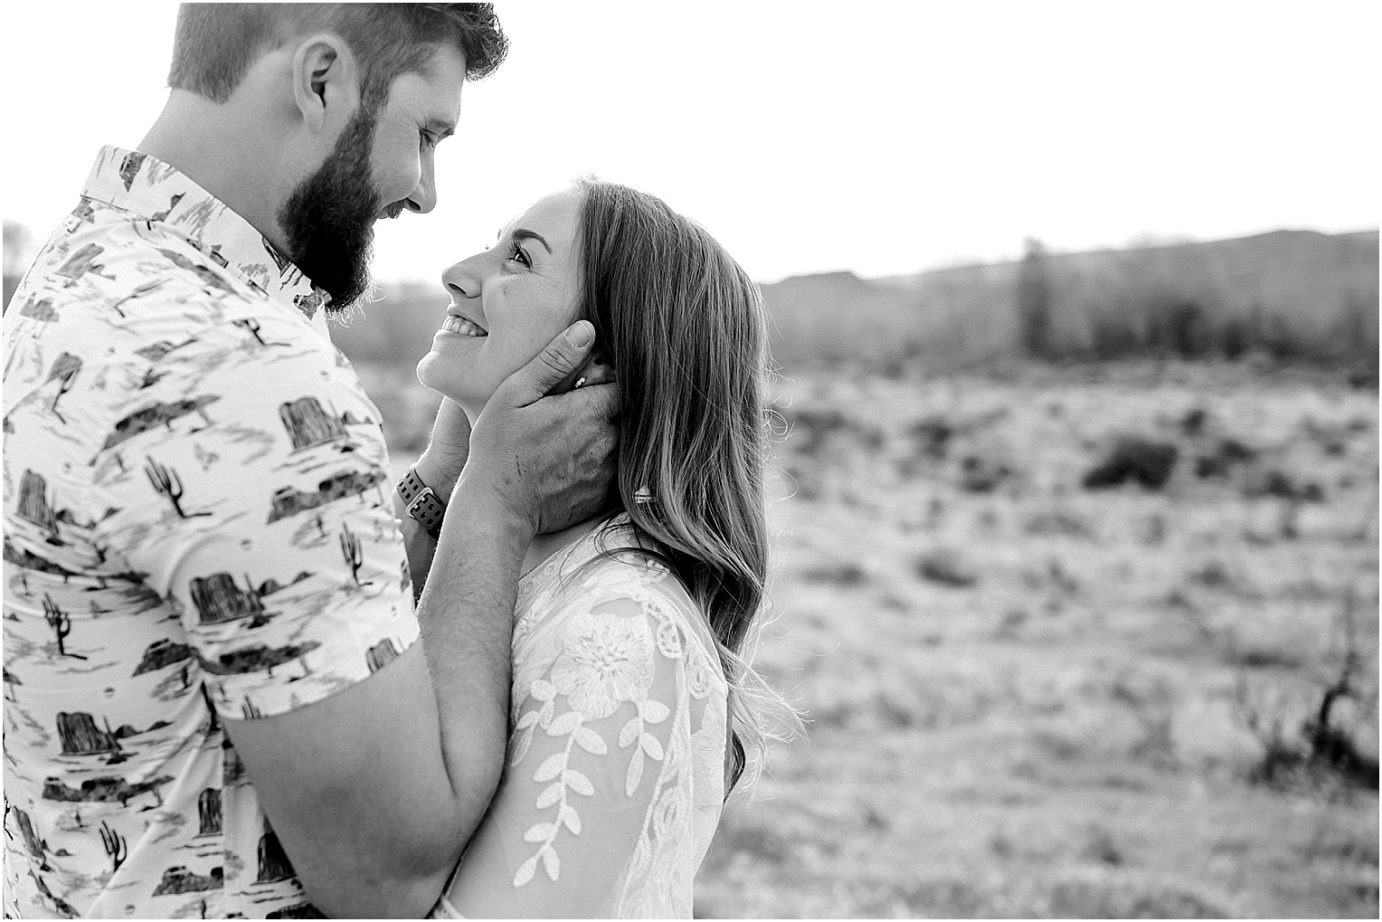 eastern washington engagement session PNW photographer Travis and arianna hugging in a field